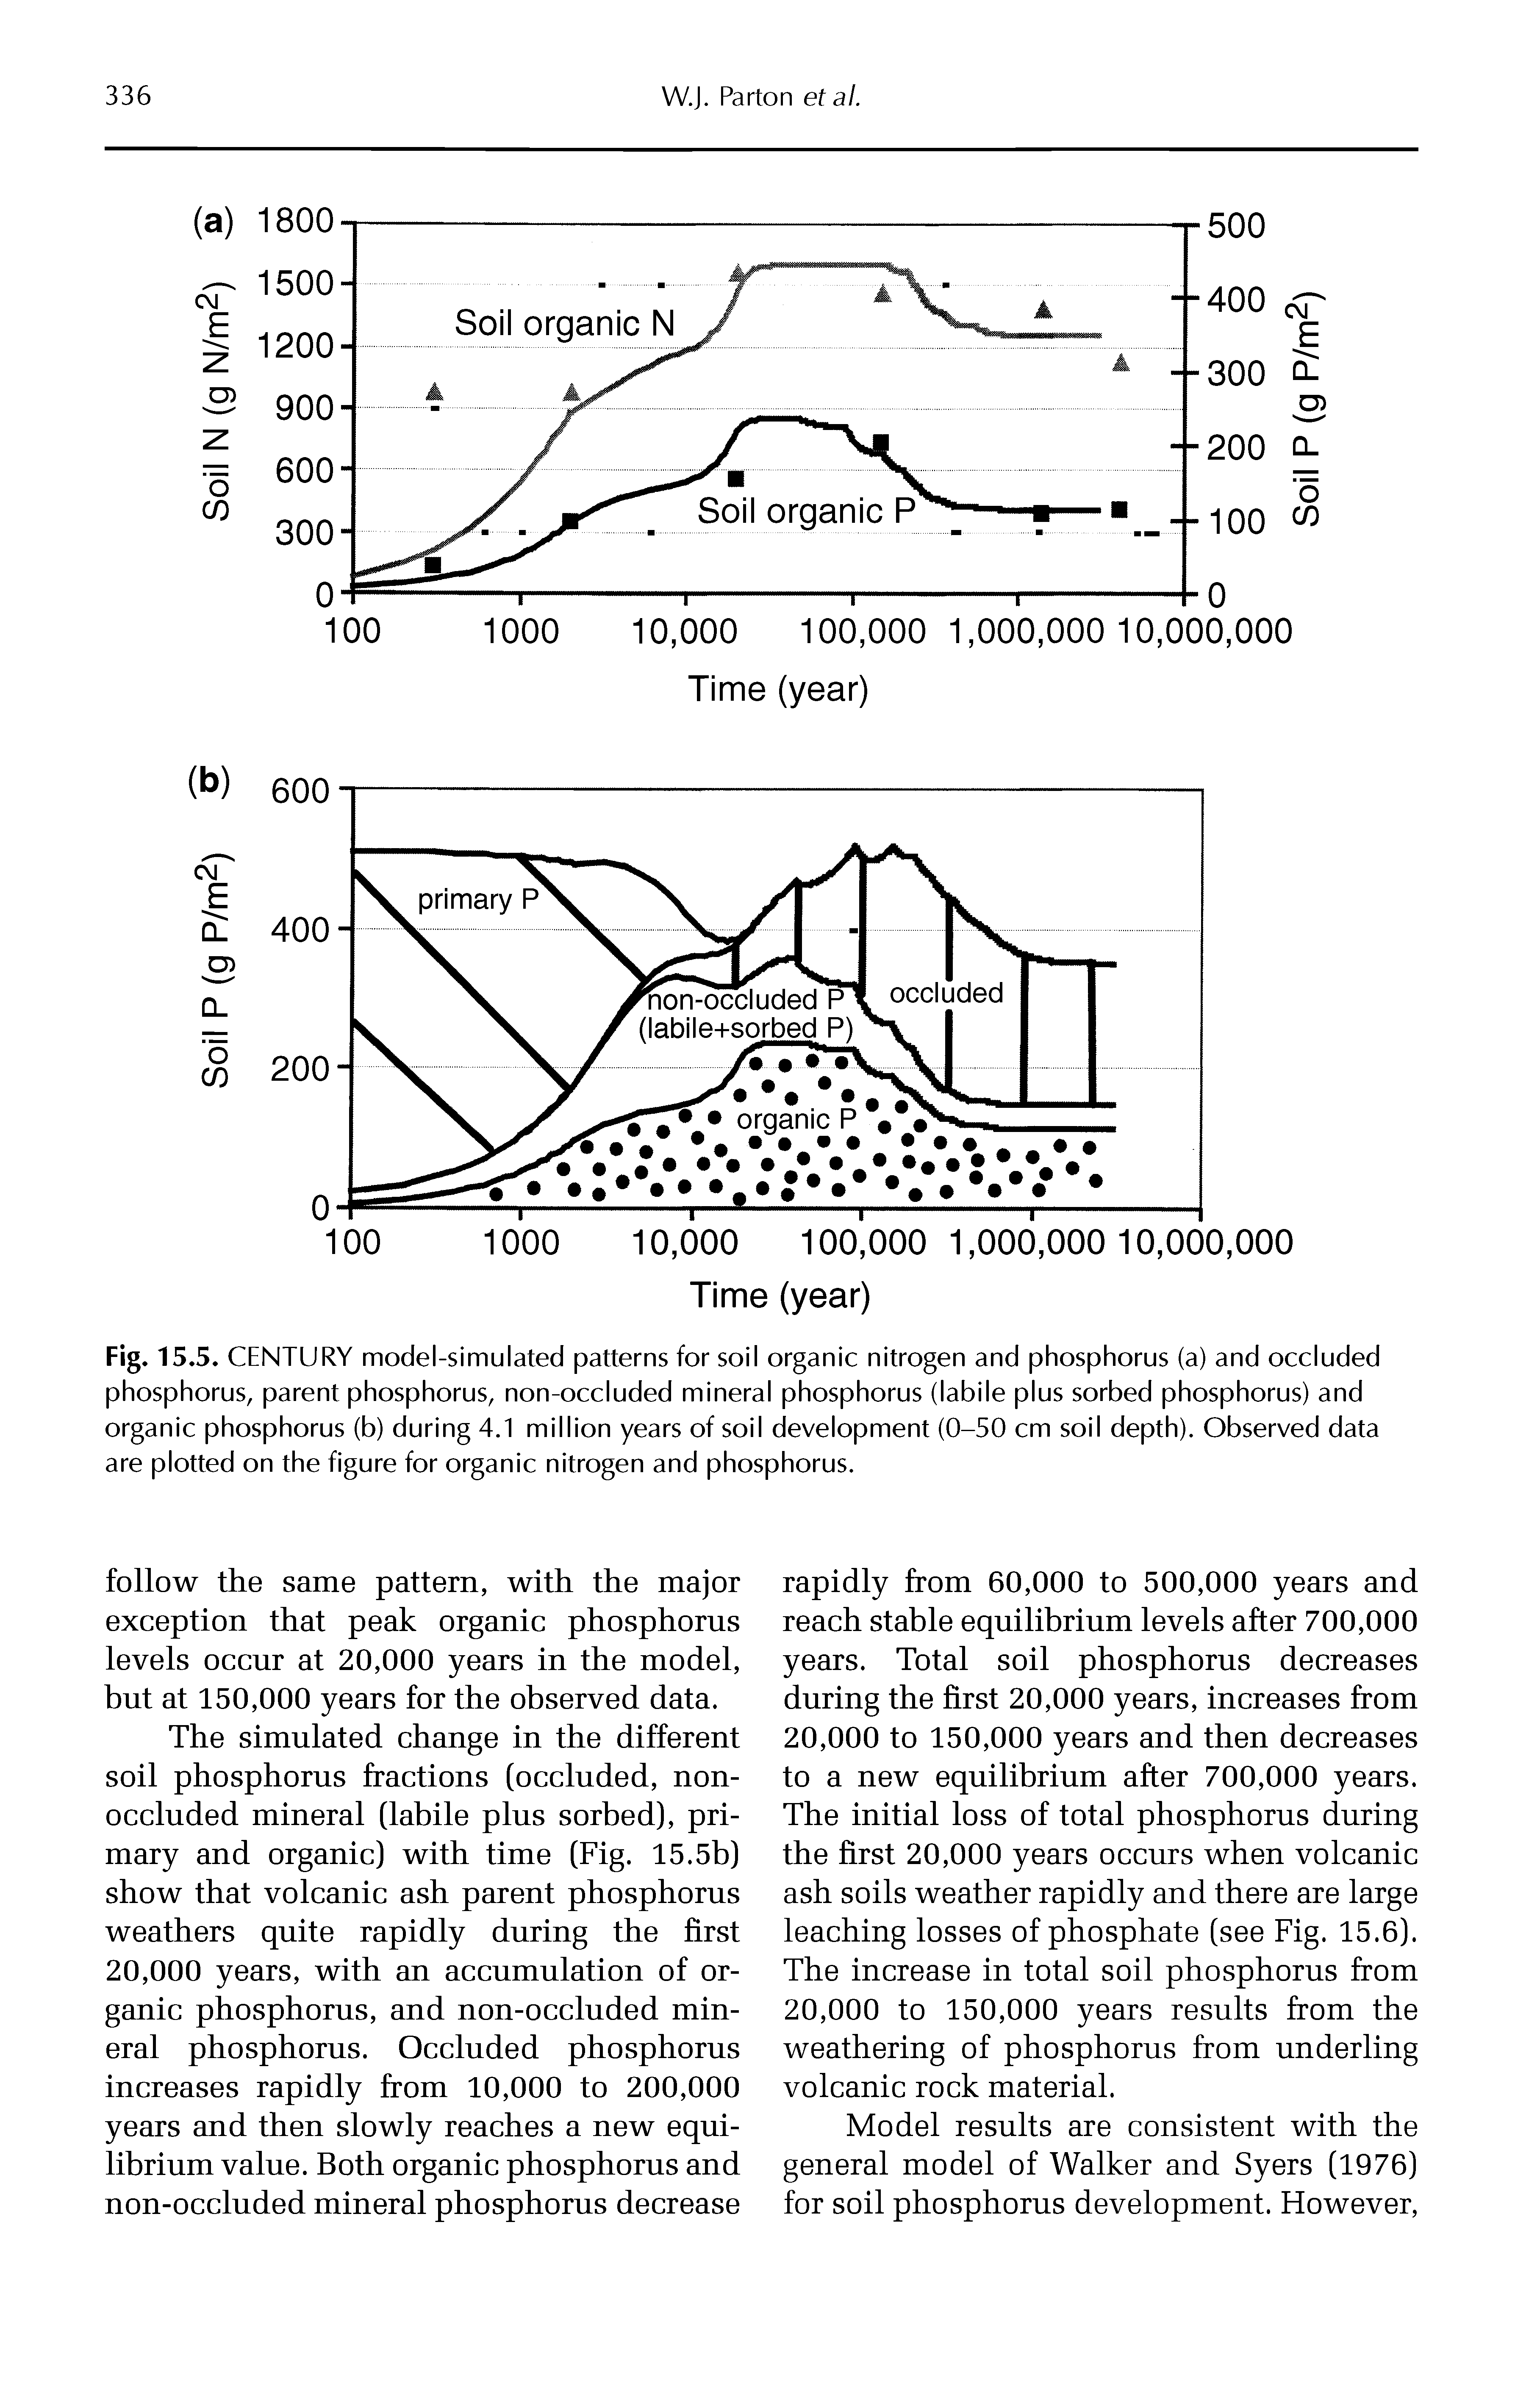 Fig. 15.5. CENTURY model-simulated patterns for soil organic nitrogen and phosphorus (a) and occluded phosphorus, parent phosphorus, non-occluded mineral phosphorus (labile plus sorbed phosphorus) and organic phosphorus (b) during 4.1 million years of soil development (0-50 cm soil depth). Observed data are plotted on the figure for organic nitrogen and phosphorus.